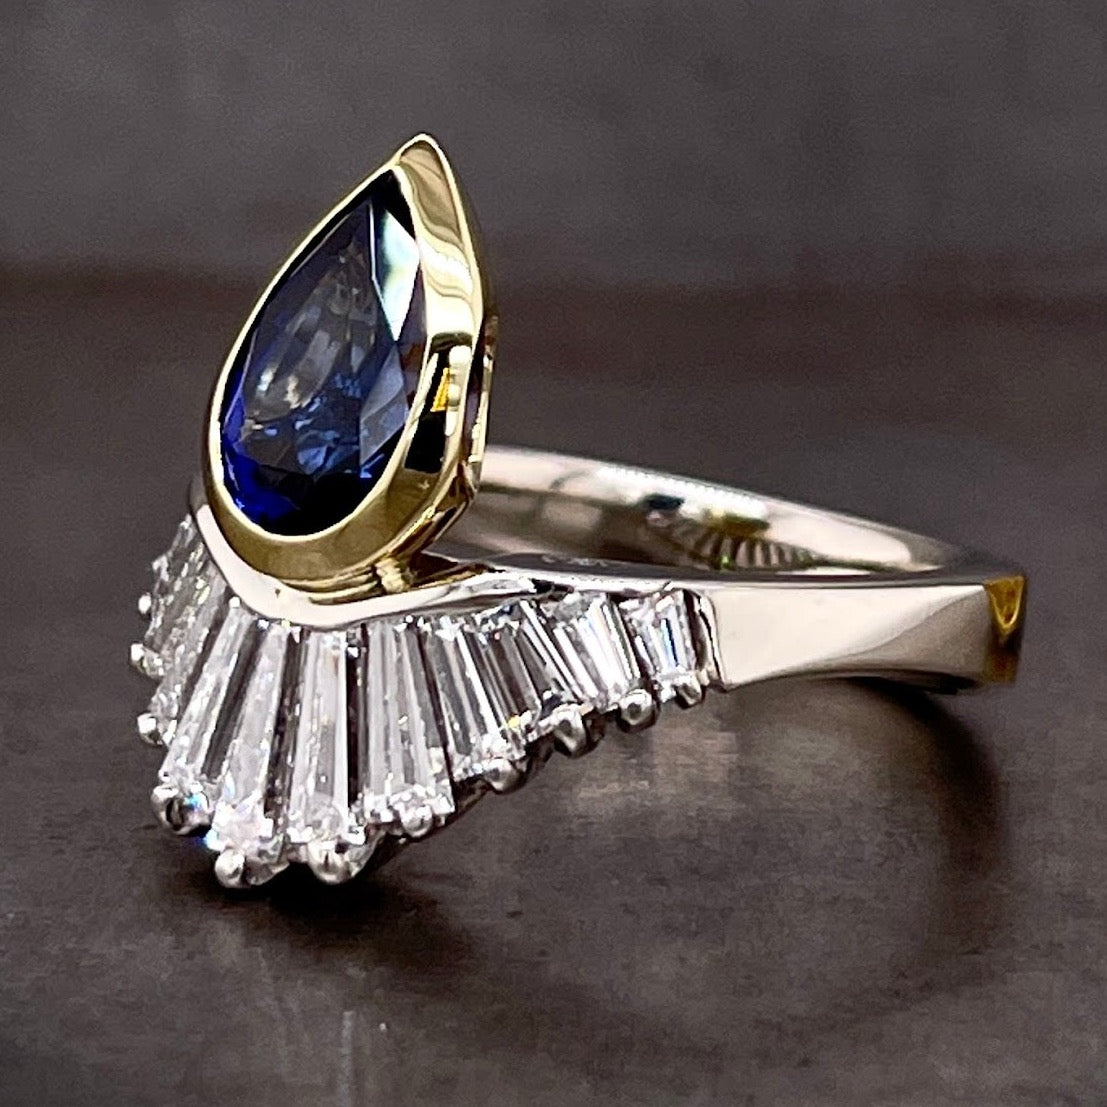 3/4 view of blue sapphire and diamond ring. The blue sapphire is positioned upwards.  The tapered diamond baguettes are  arrayed along the lower half of the ring.  